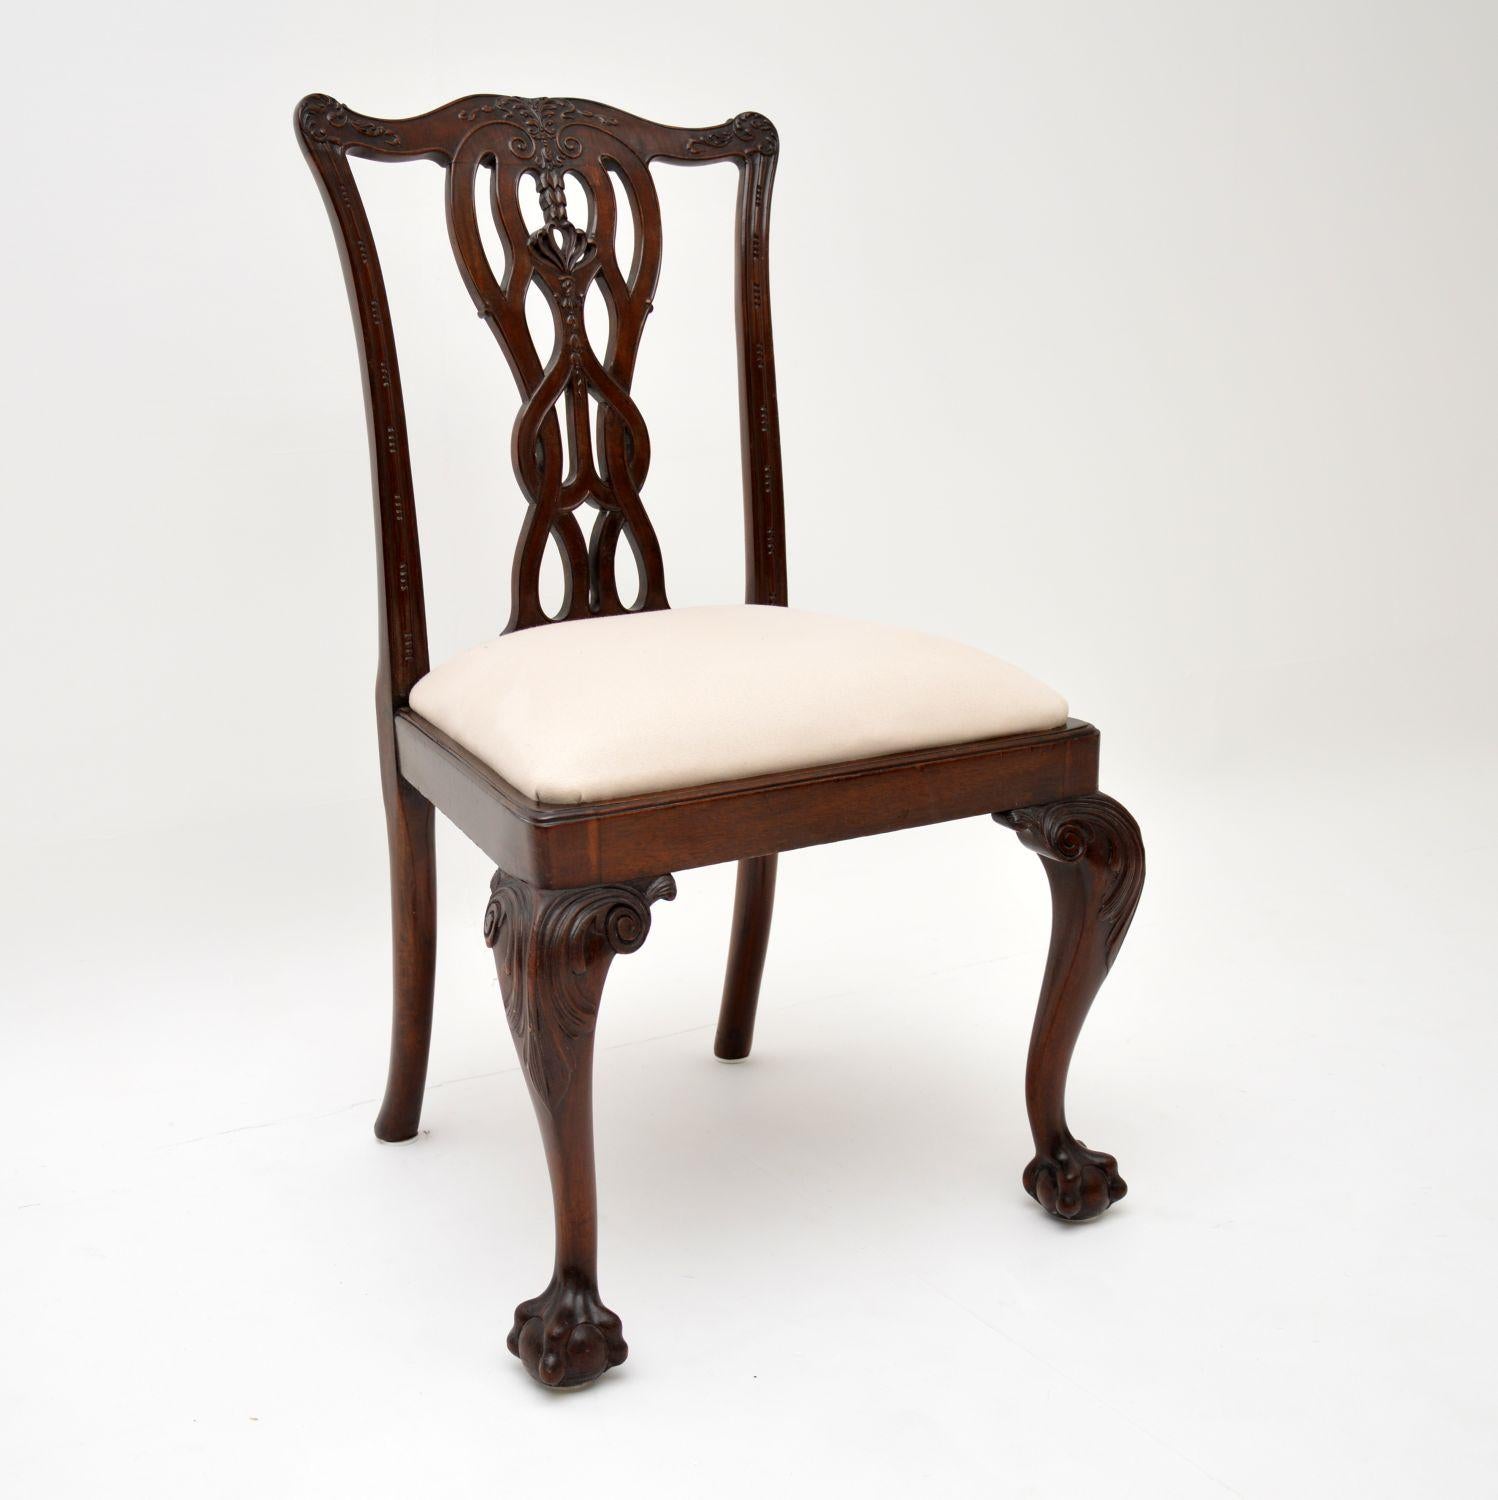 An absolutely superb set of eight antique dining chairs in solid Mahogany. These are of amazing quality, they date from around the 1910-20 period. The previous owner told us they were made by Hille, which is possible as Hille were making incredibly